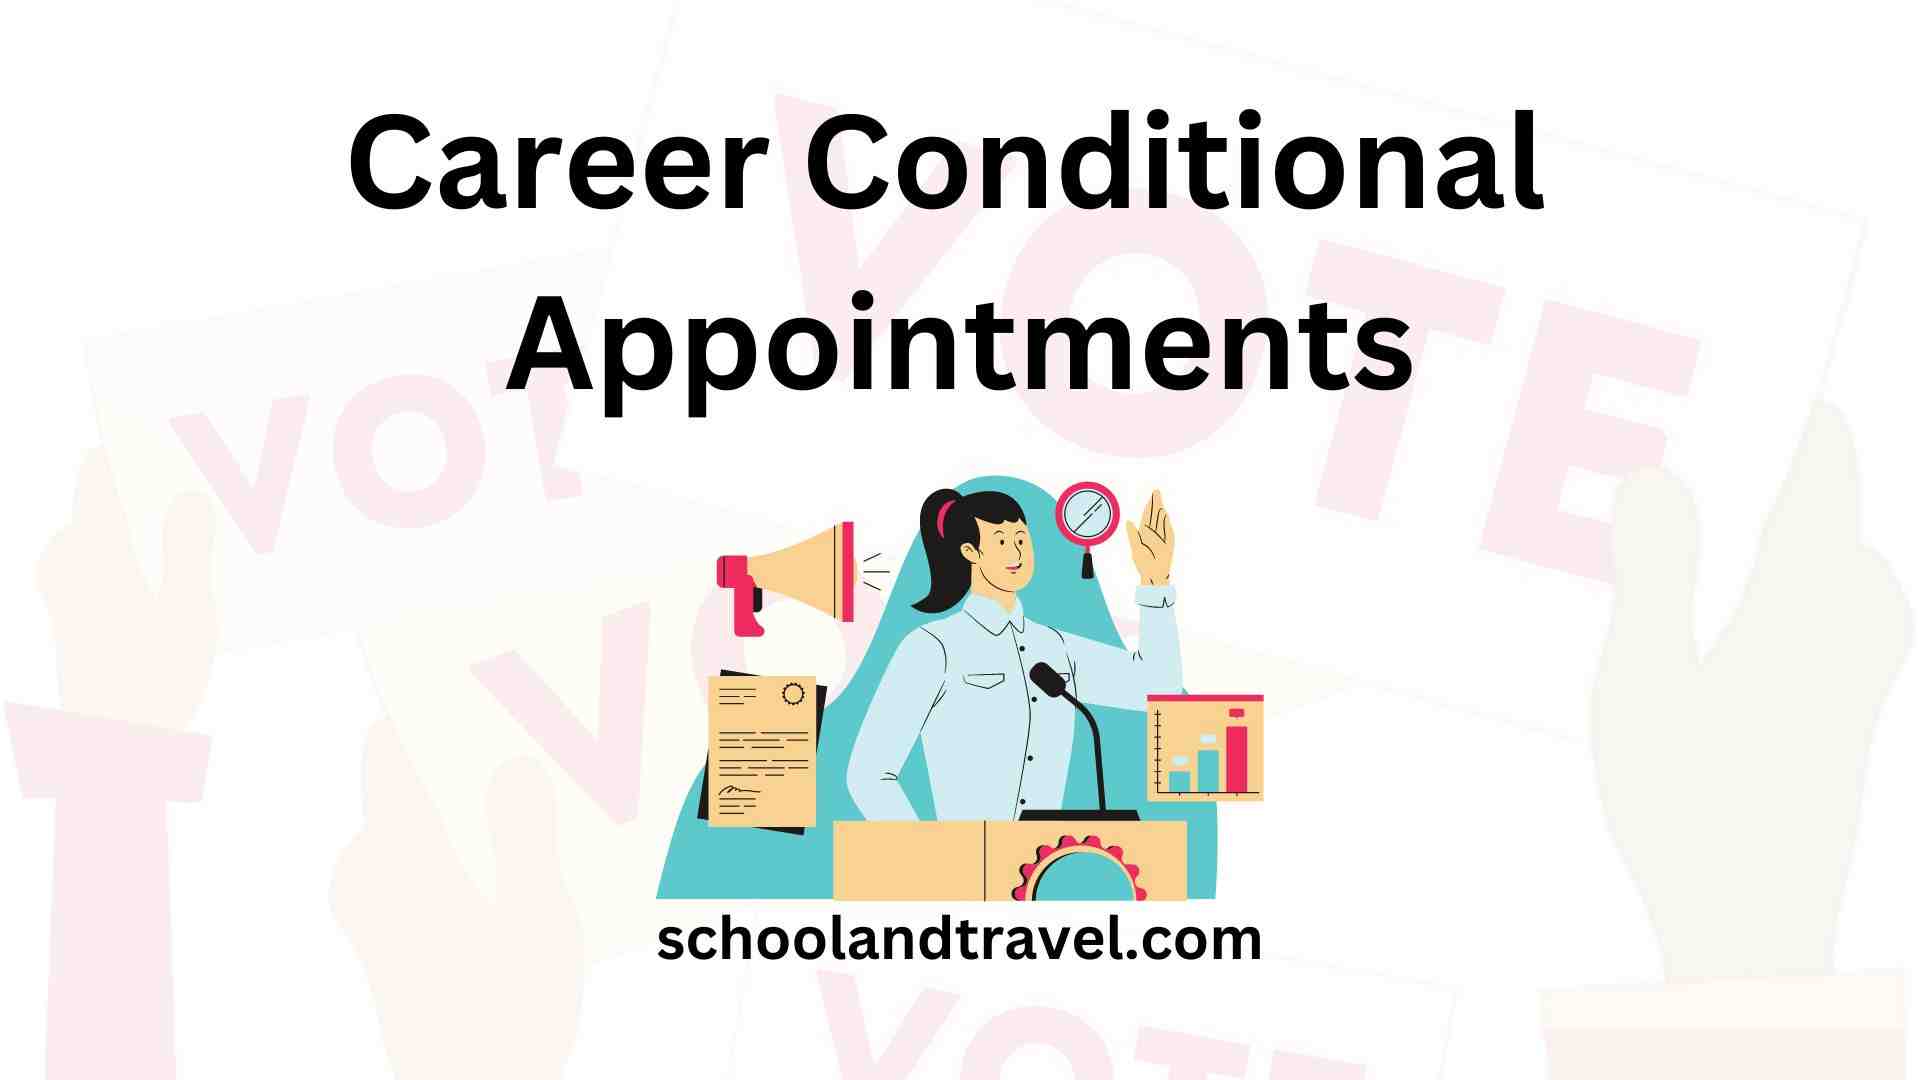 Career Conditional Appointments